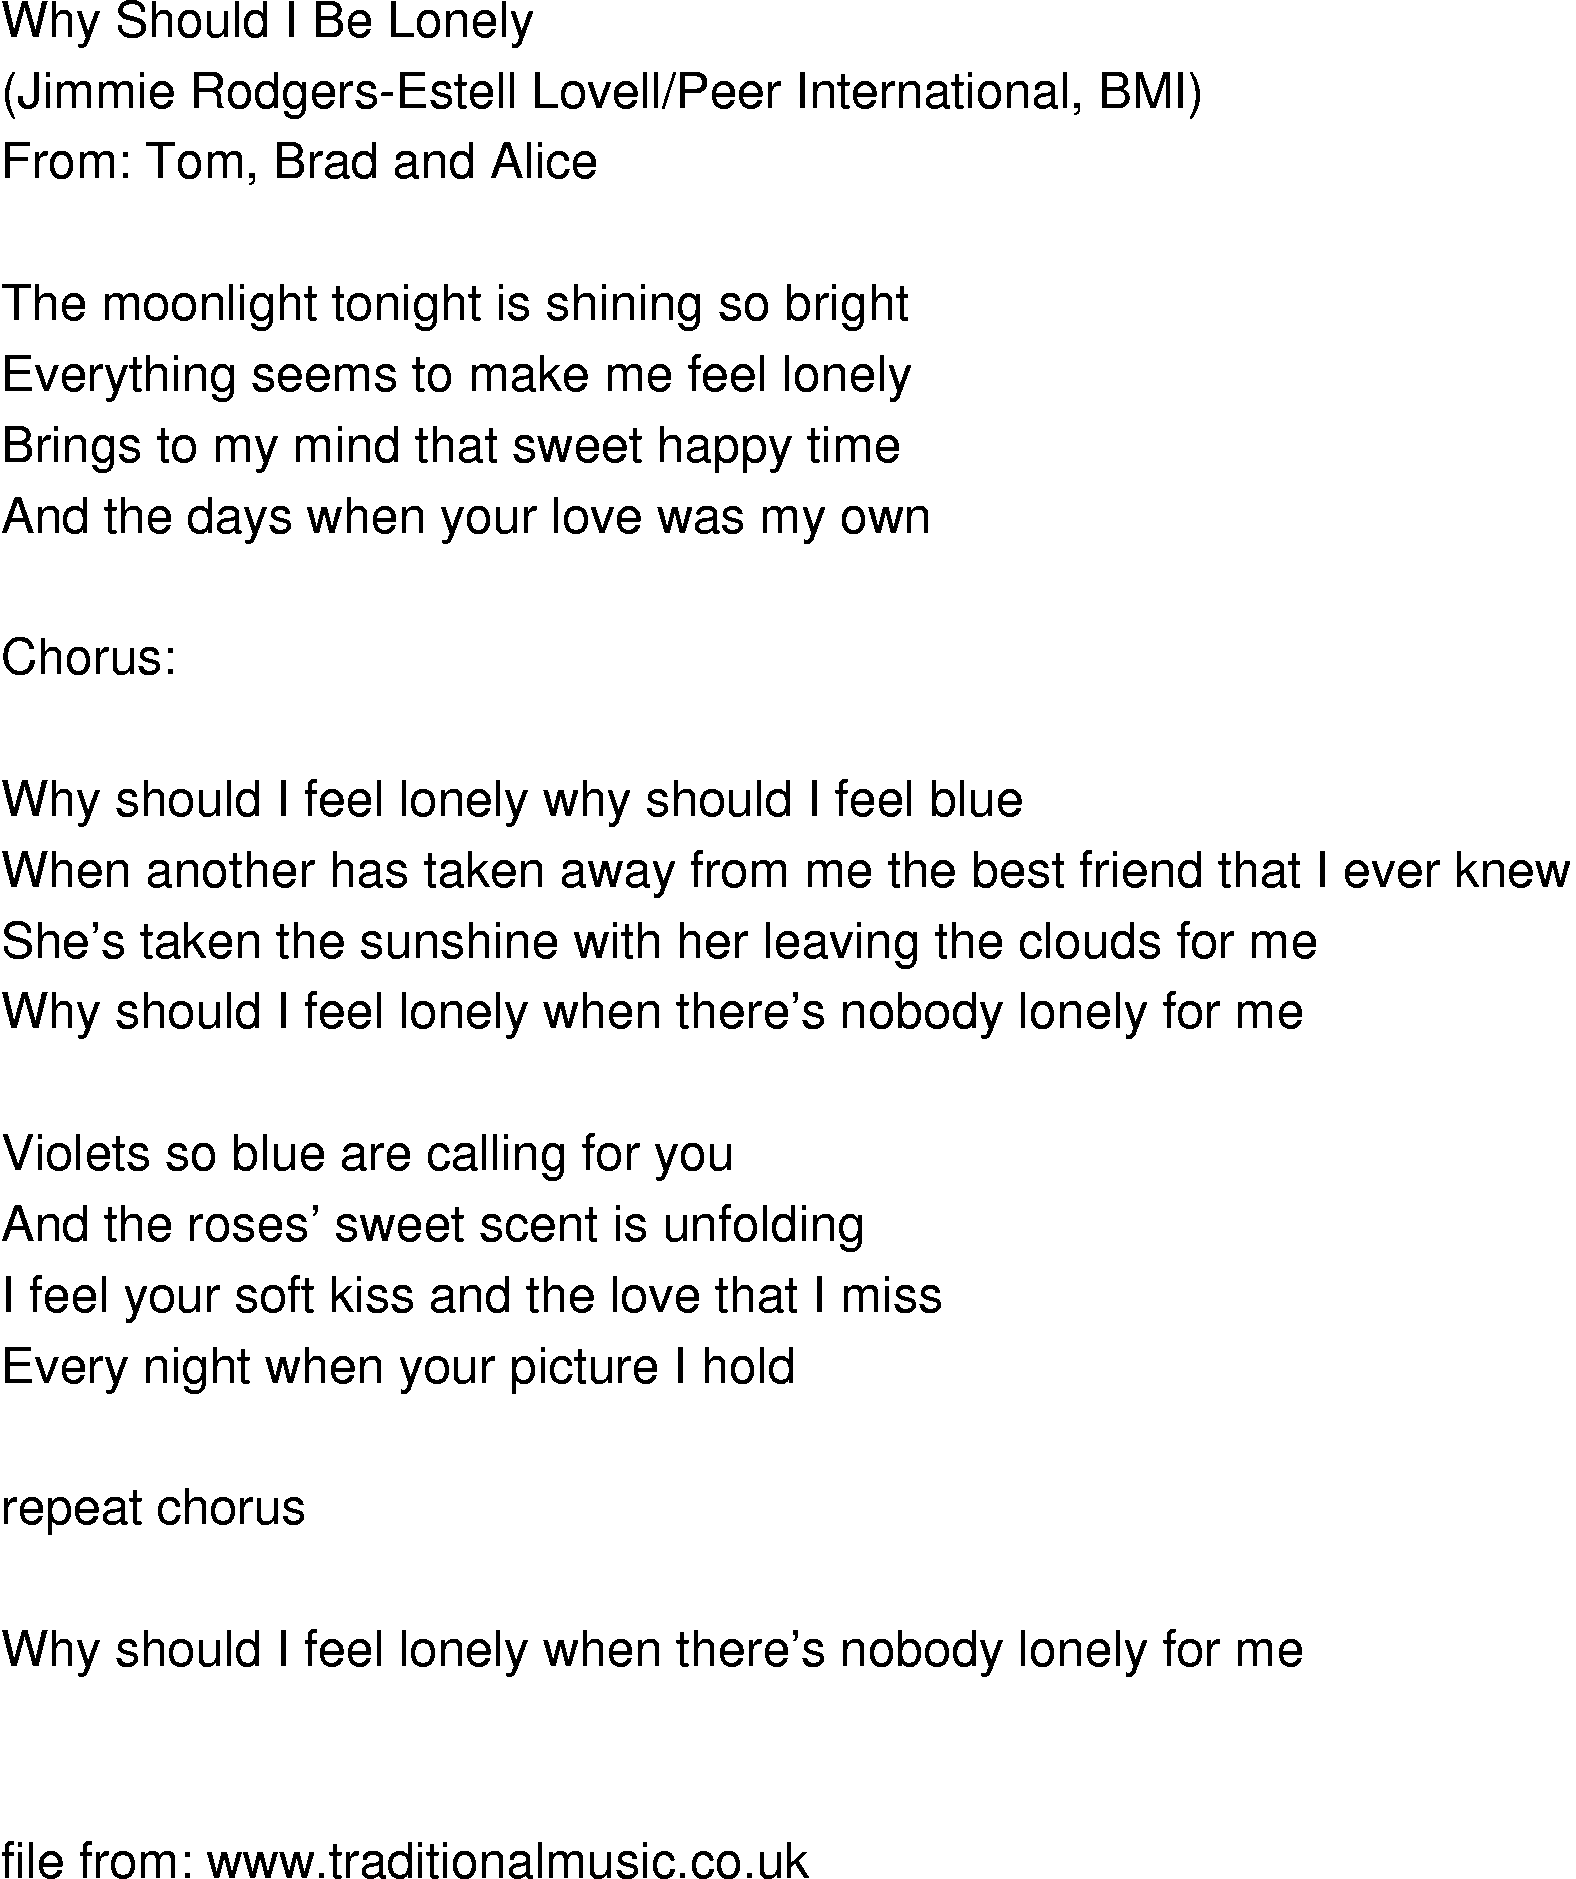 Old-Time (oldtimey) Song Lyrics - why should i be lonely